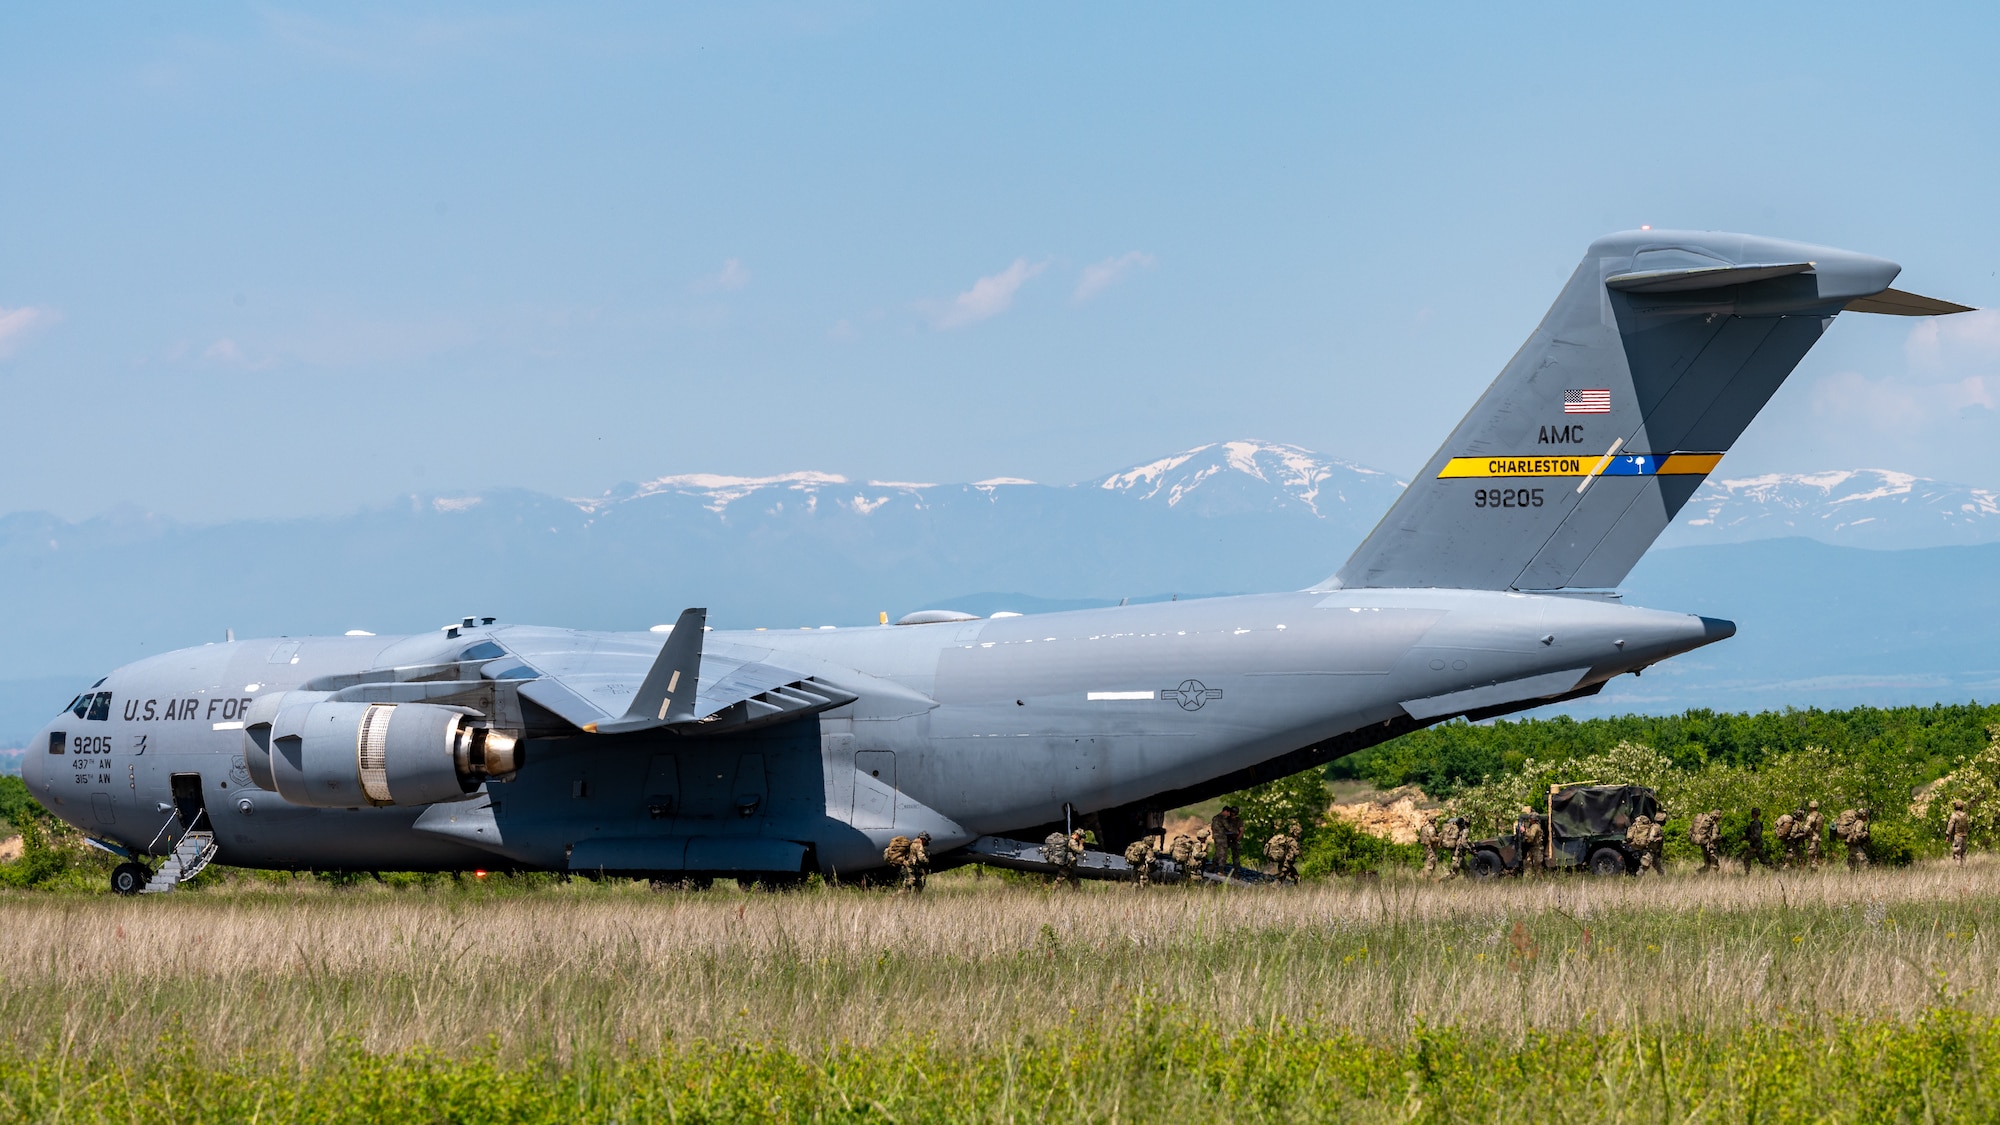 A aircraft sits on an airfield, while Airmen and Soldiers unload cargo.